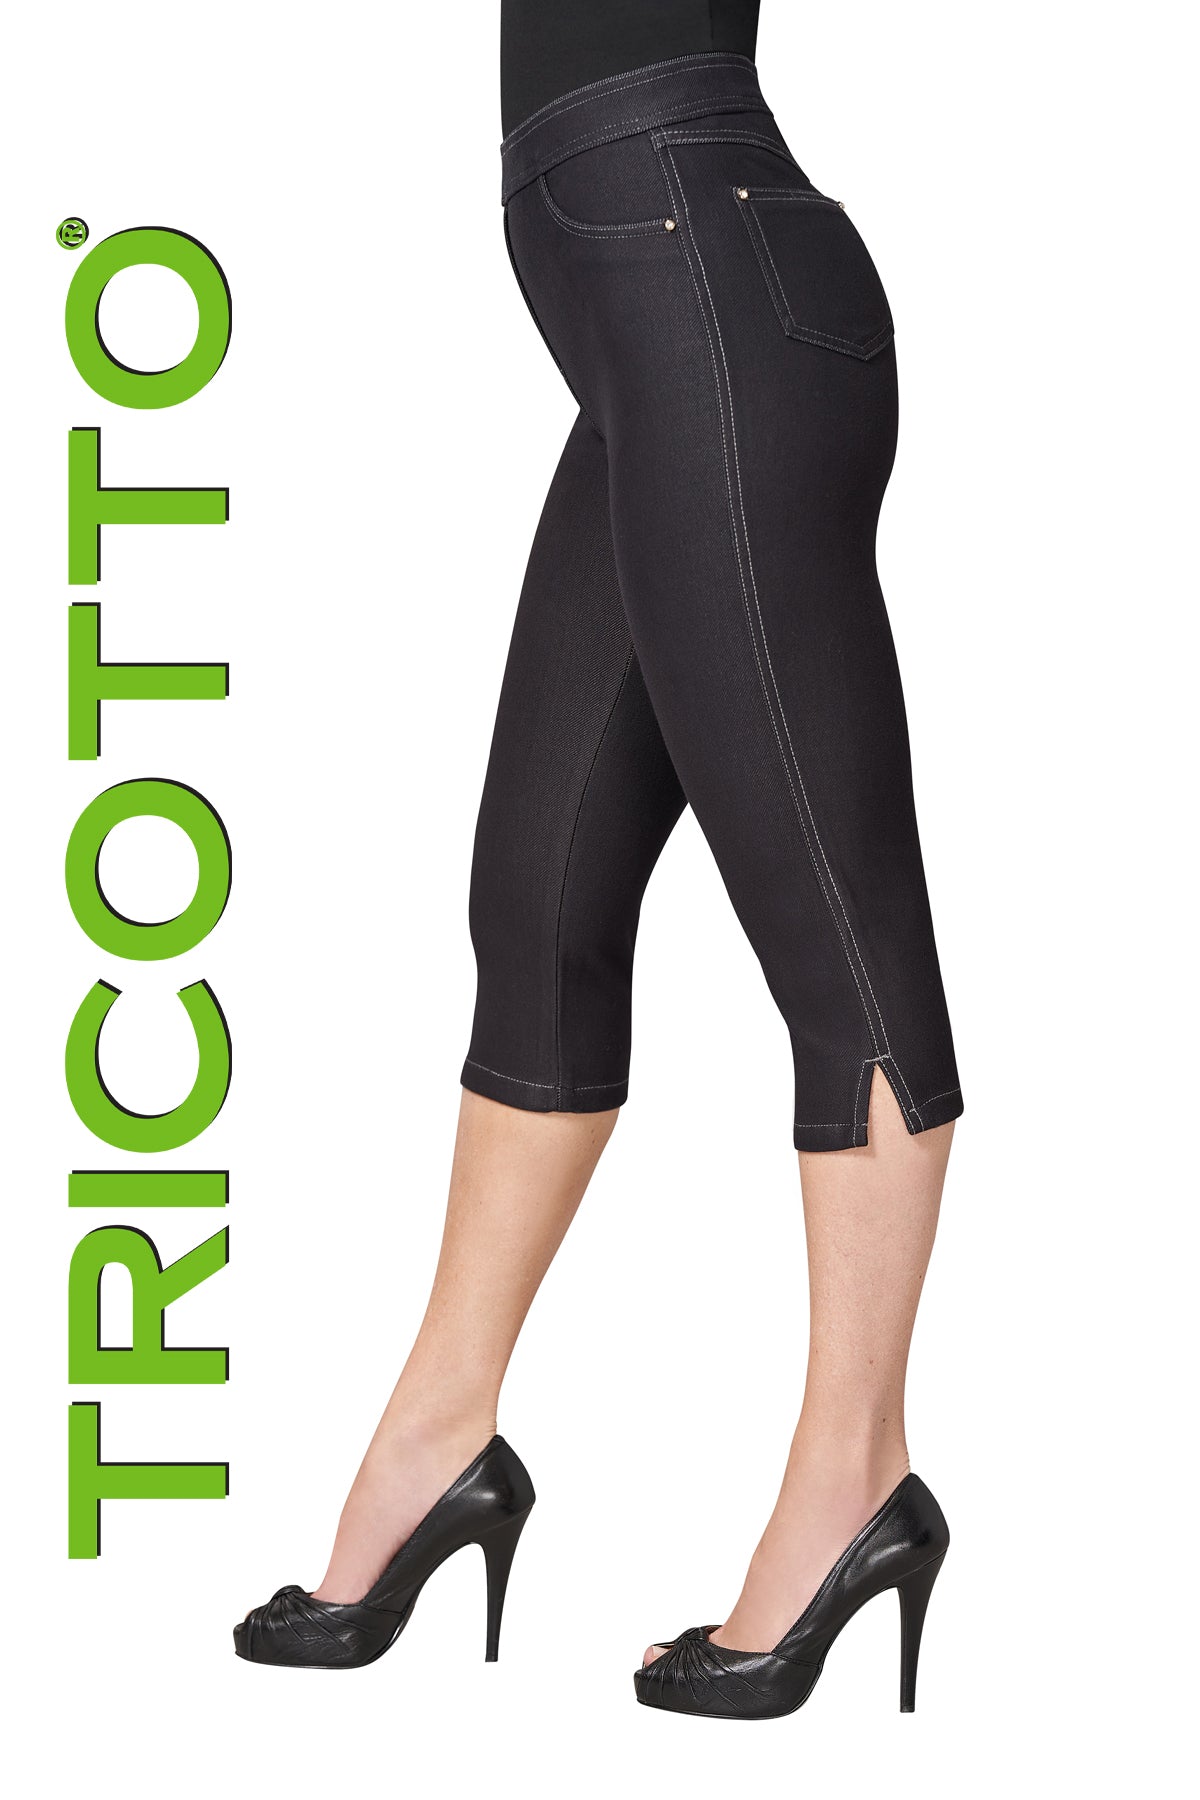 Tricotto Jeans-Tricotto Jeggings-Tricotto Pants-Buy Tricotto Clothing Online-Tricotto Fashion Quebec